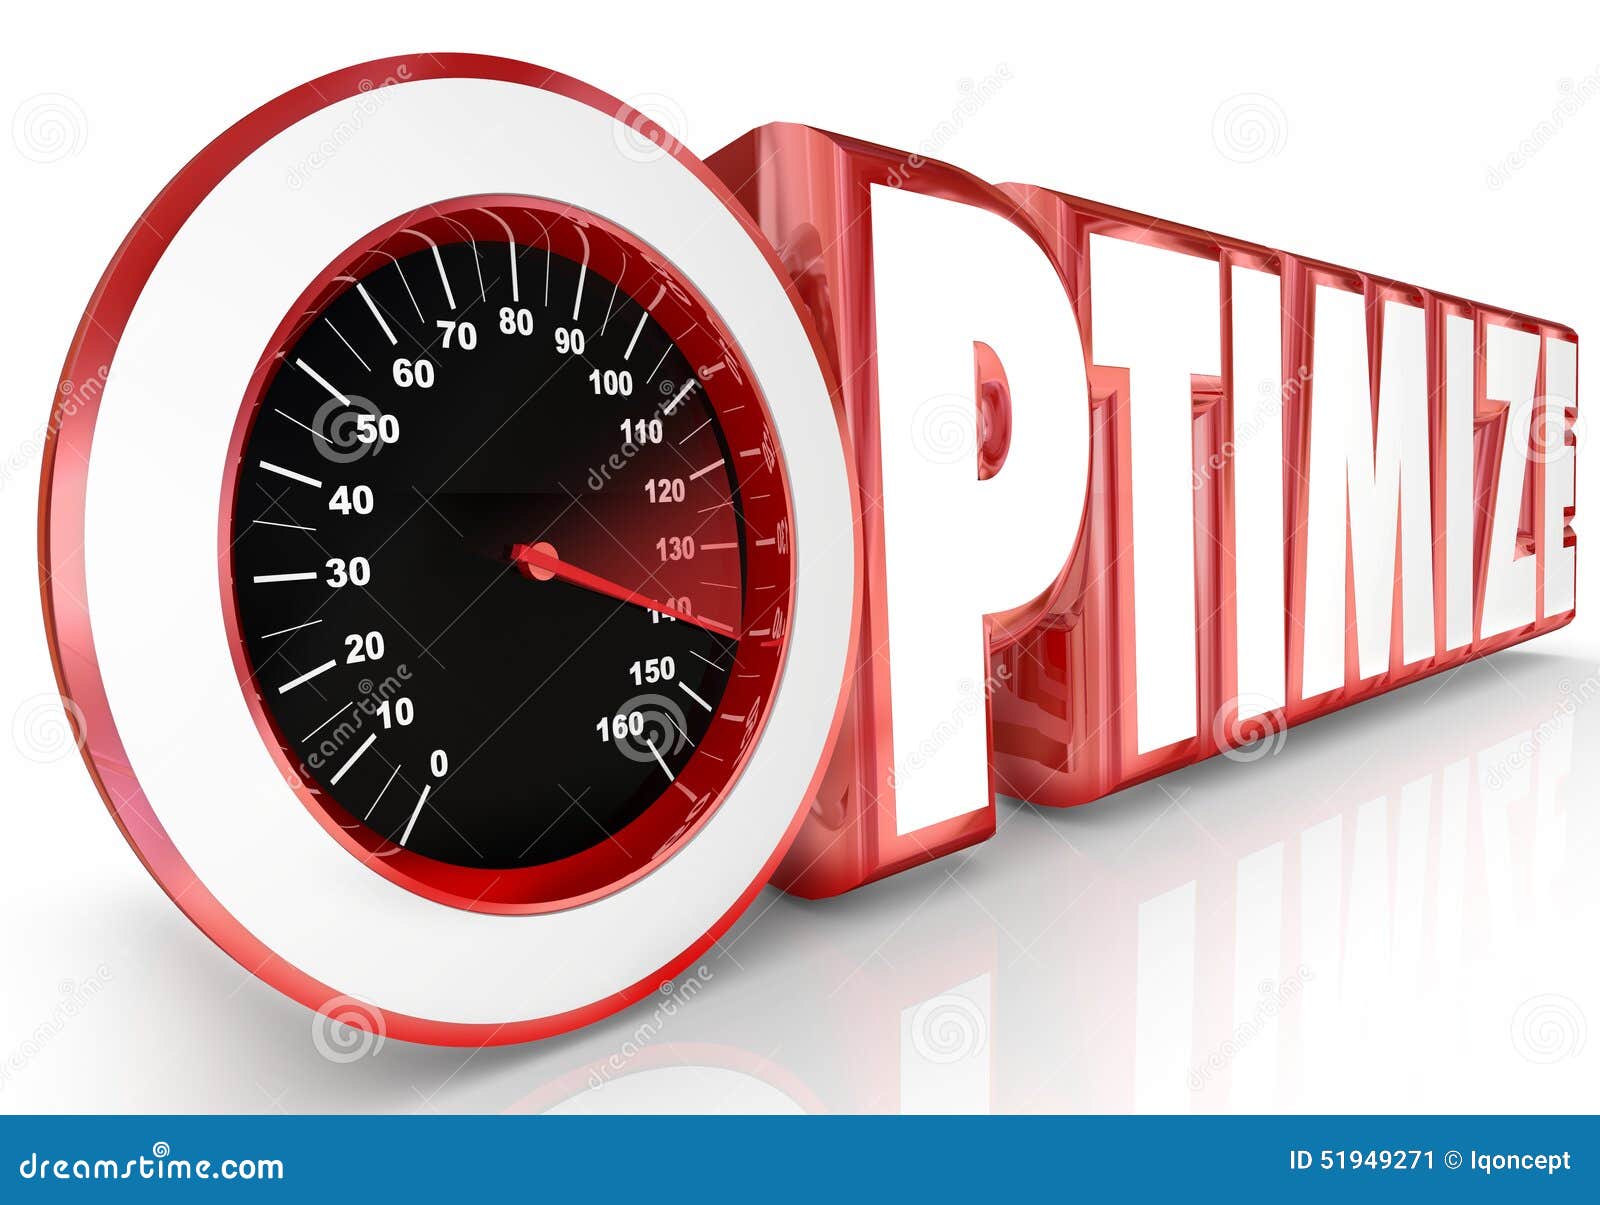 optimize speedometer word fast perfecting process efficiency pro